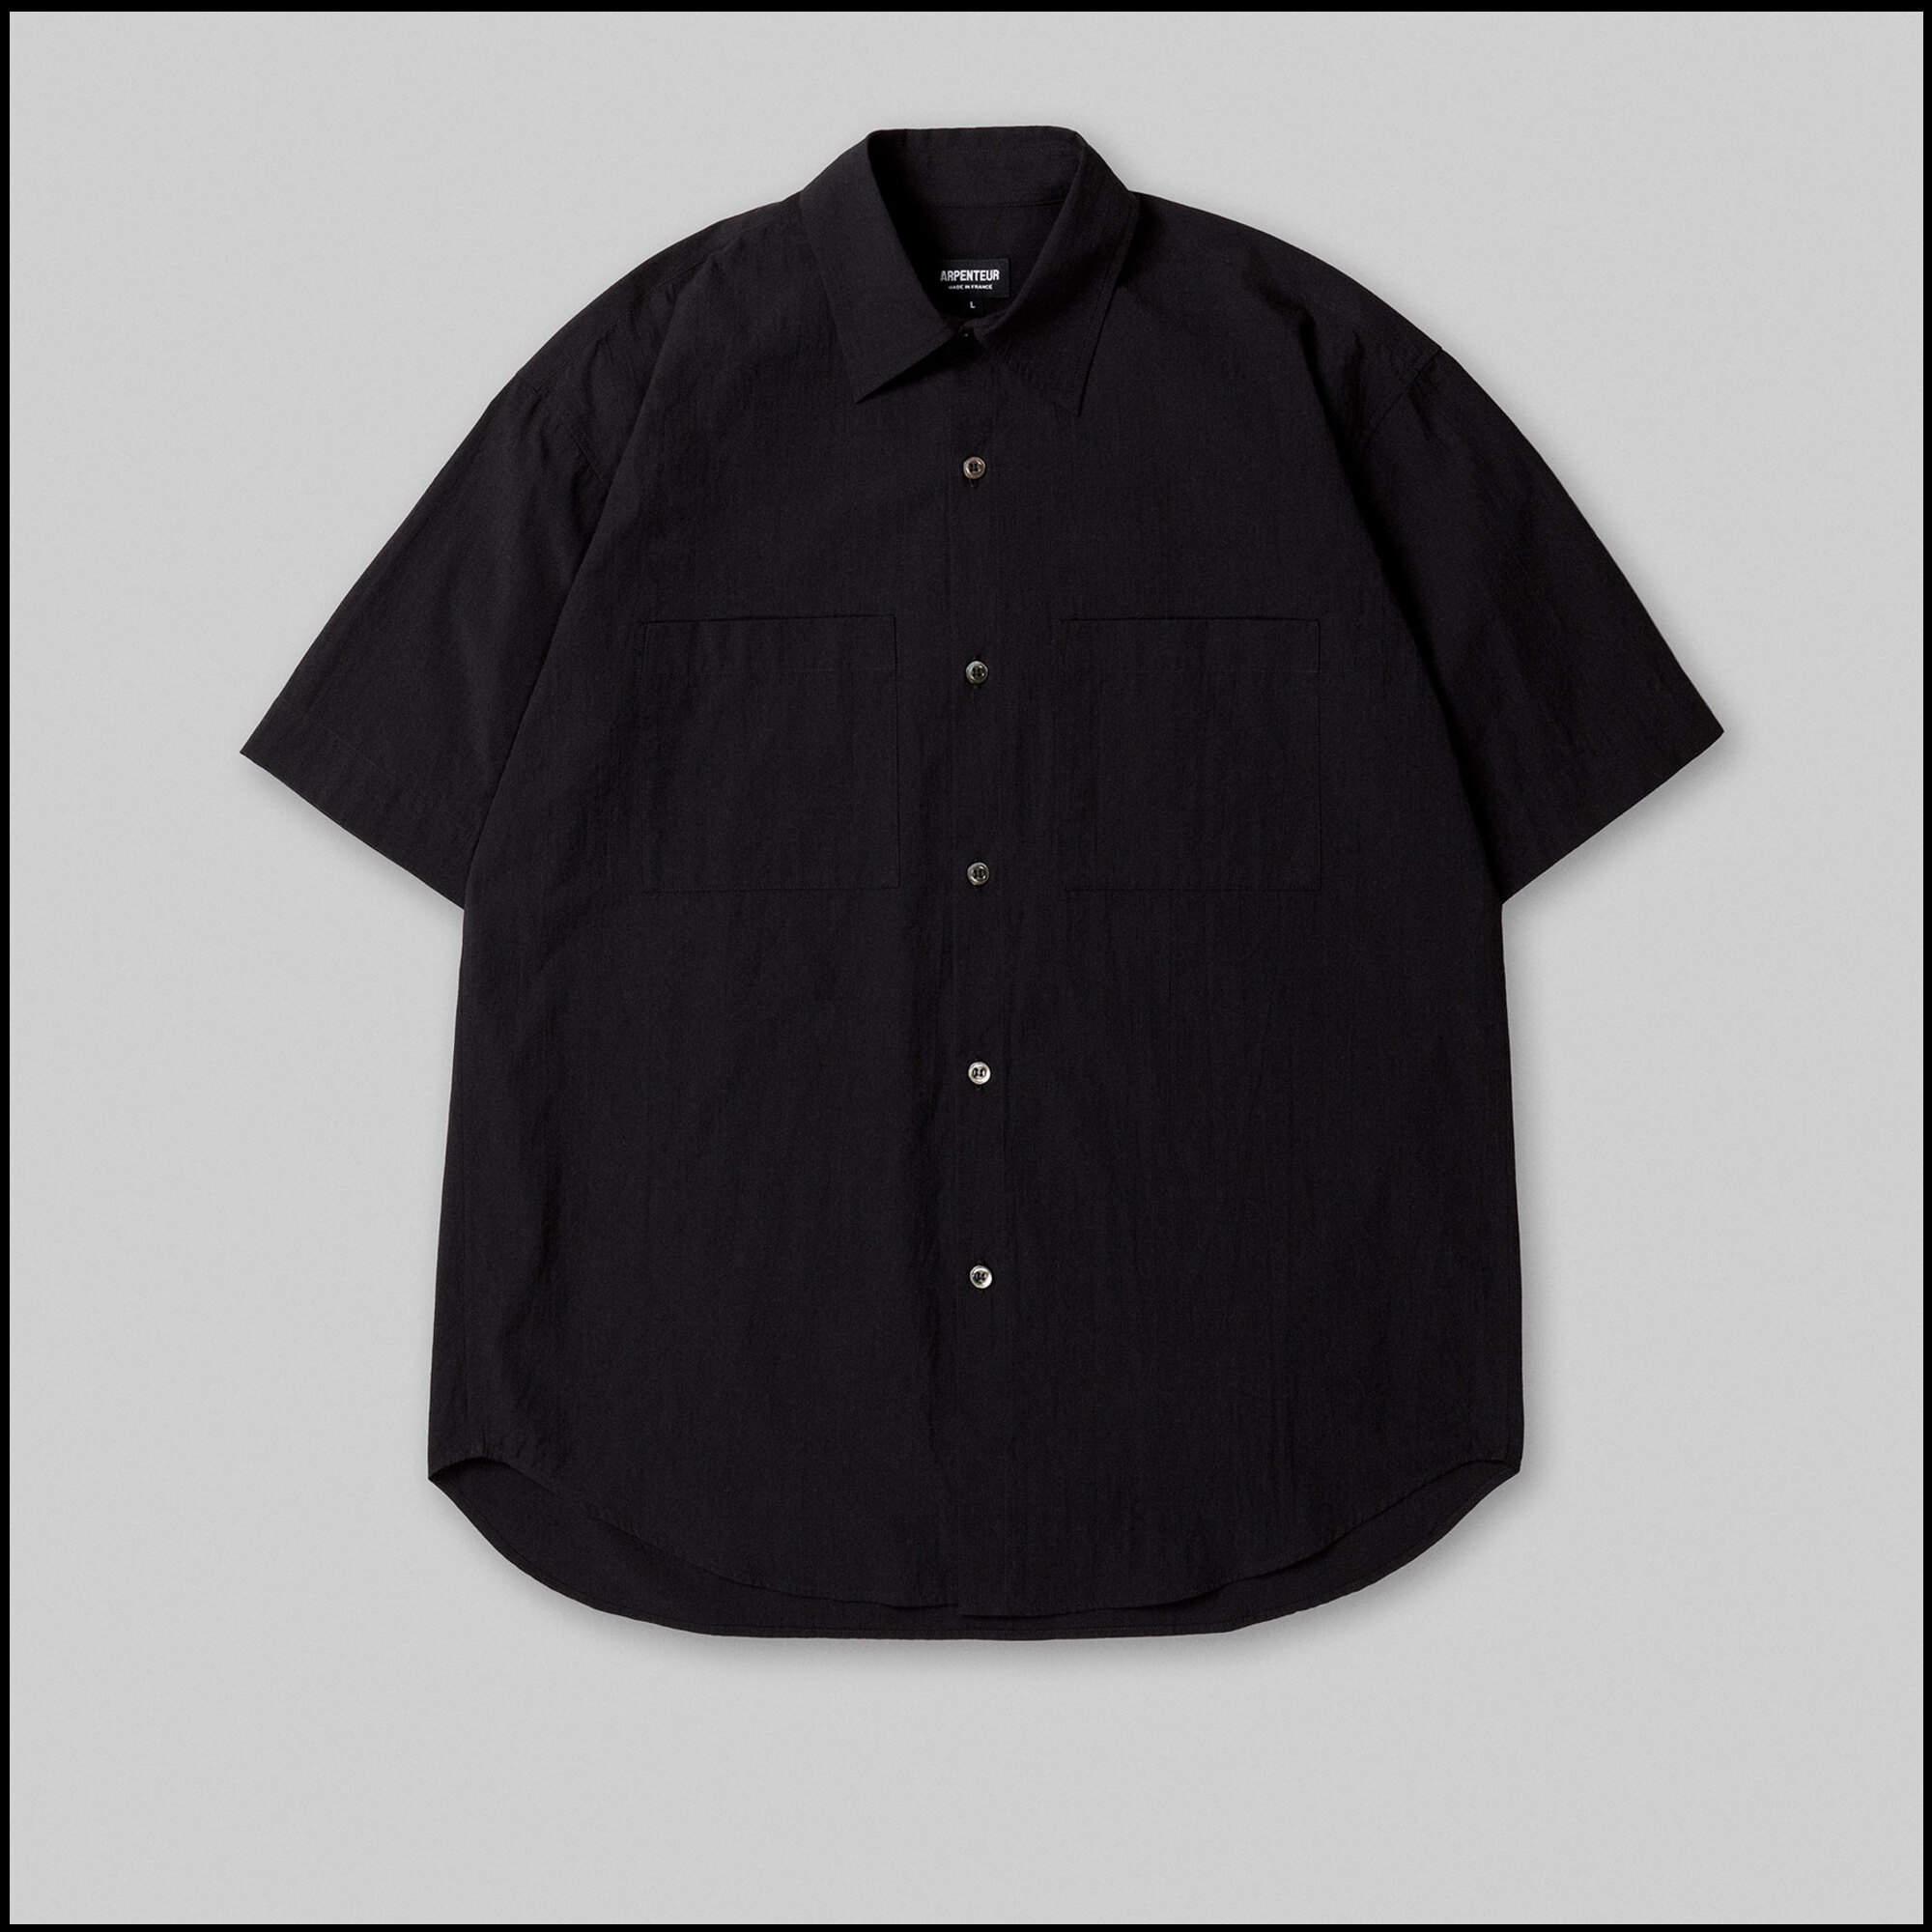 STEREO shirt by Arpenteur in Black color